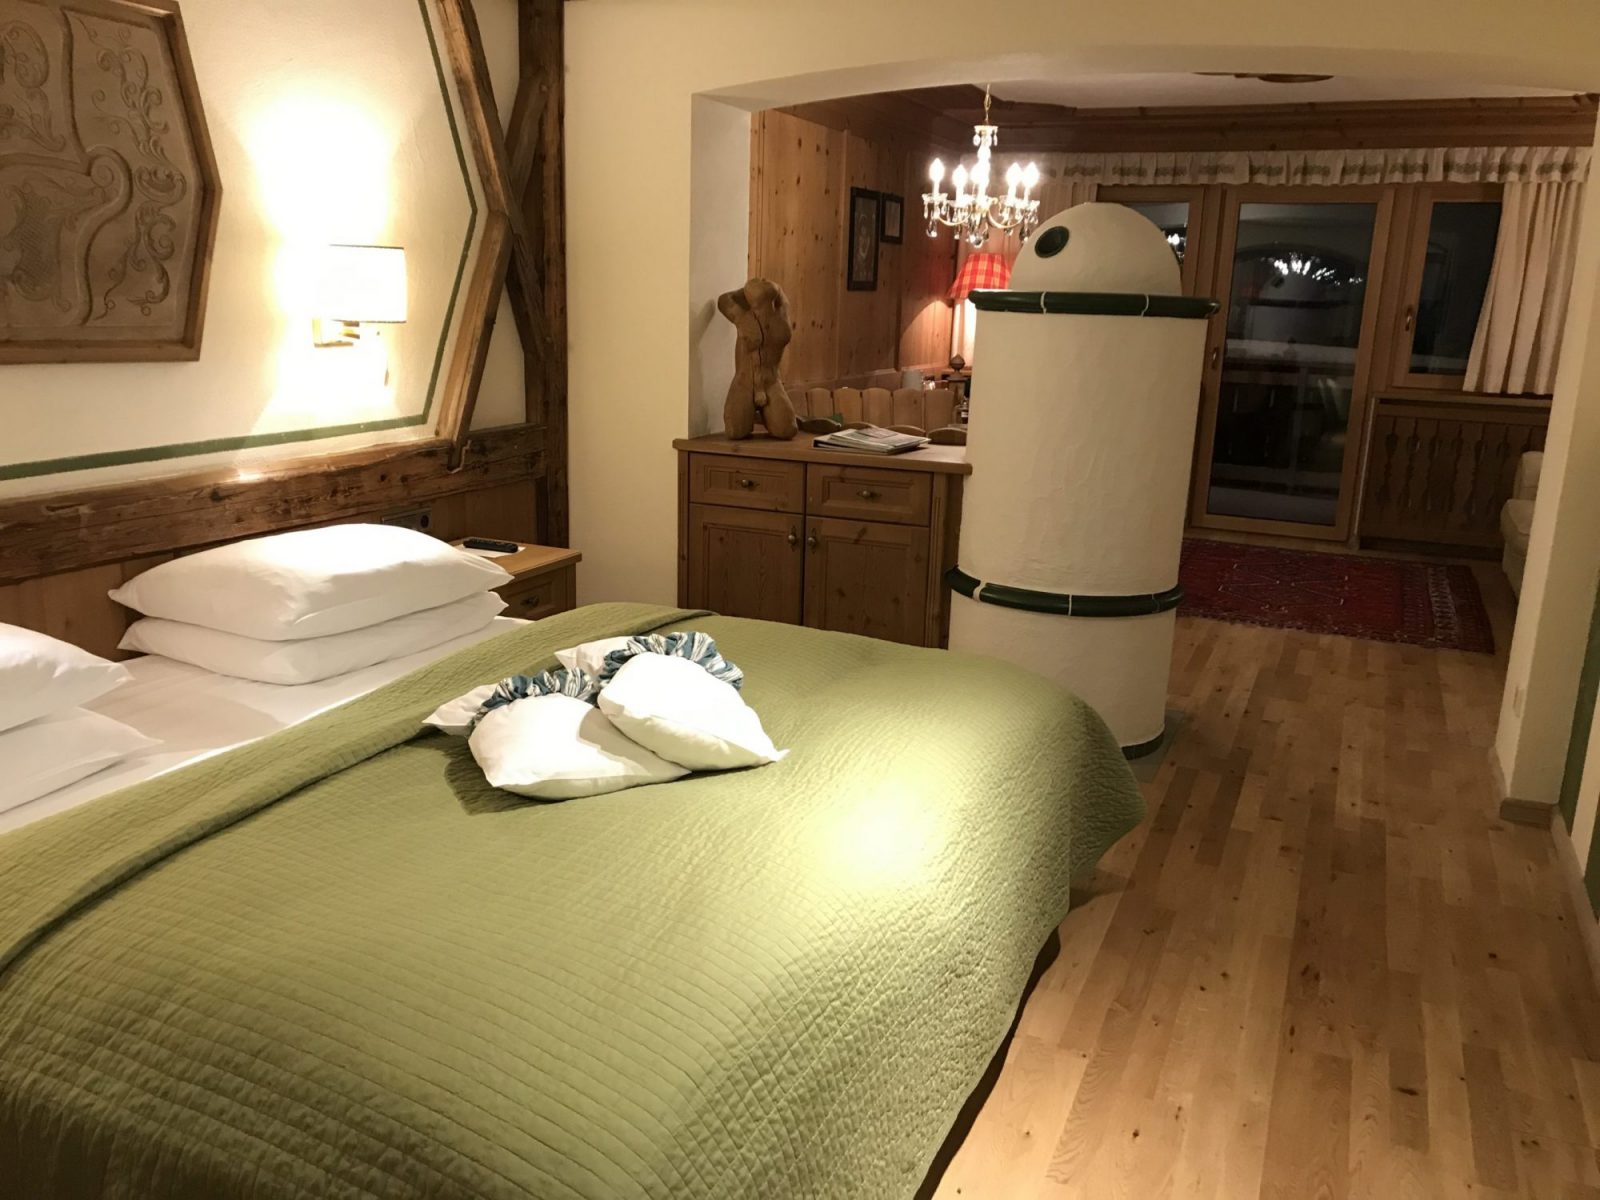 A room at the Hotel La Perla with its typical stove. Book your stay at the Hotel La Perla here. Planning your summer in the mountains of Alta Badia.